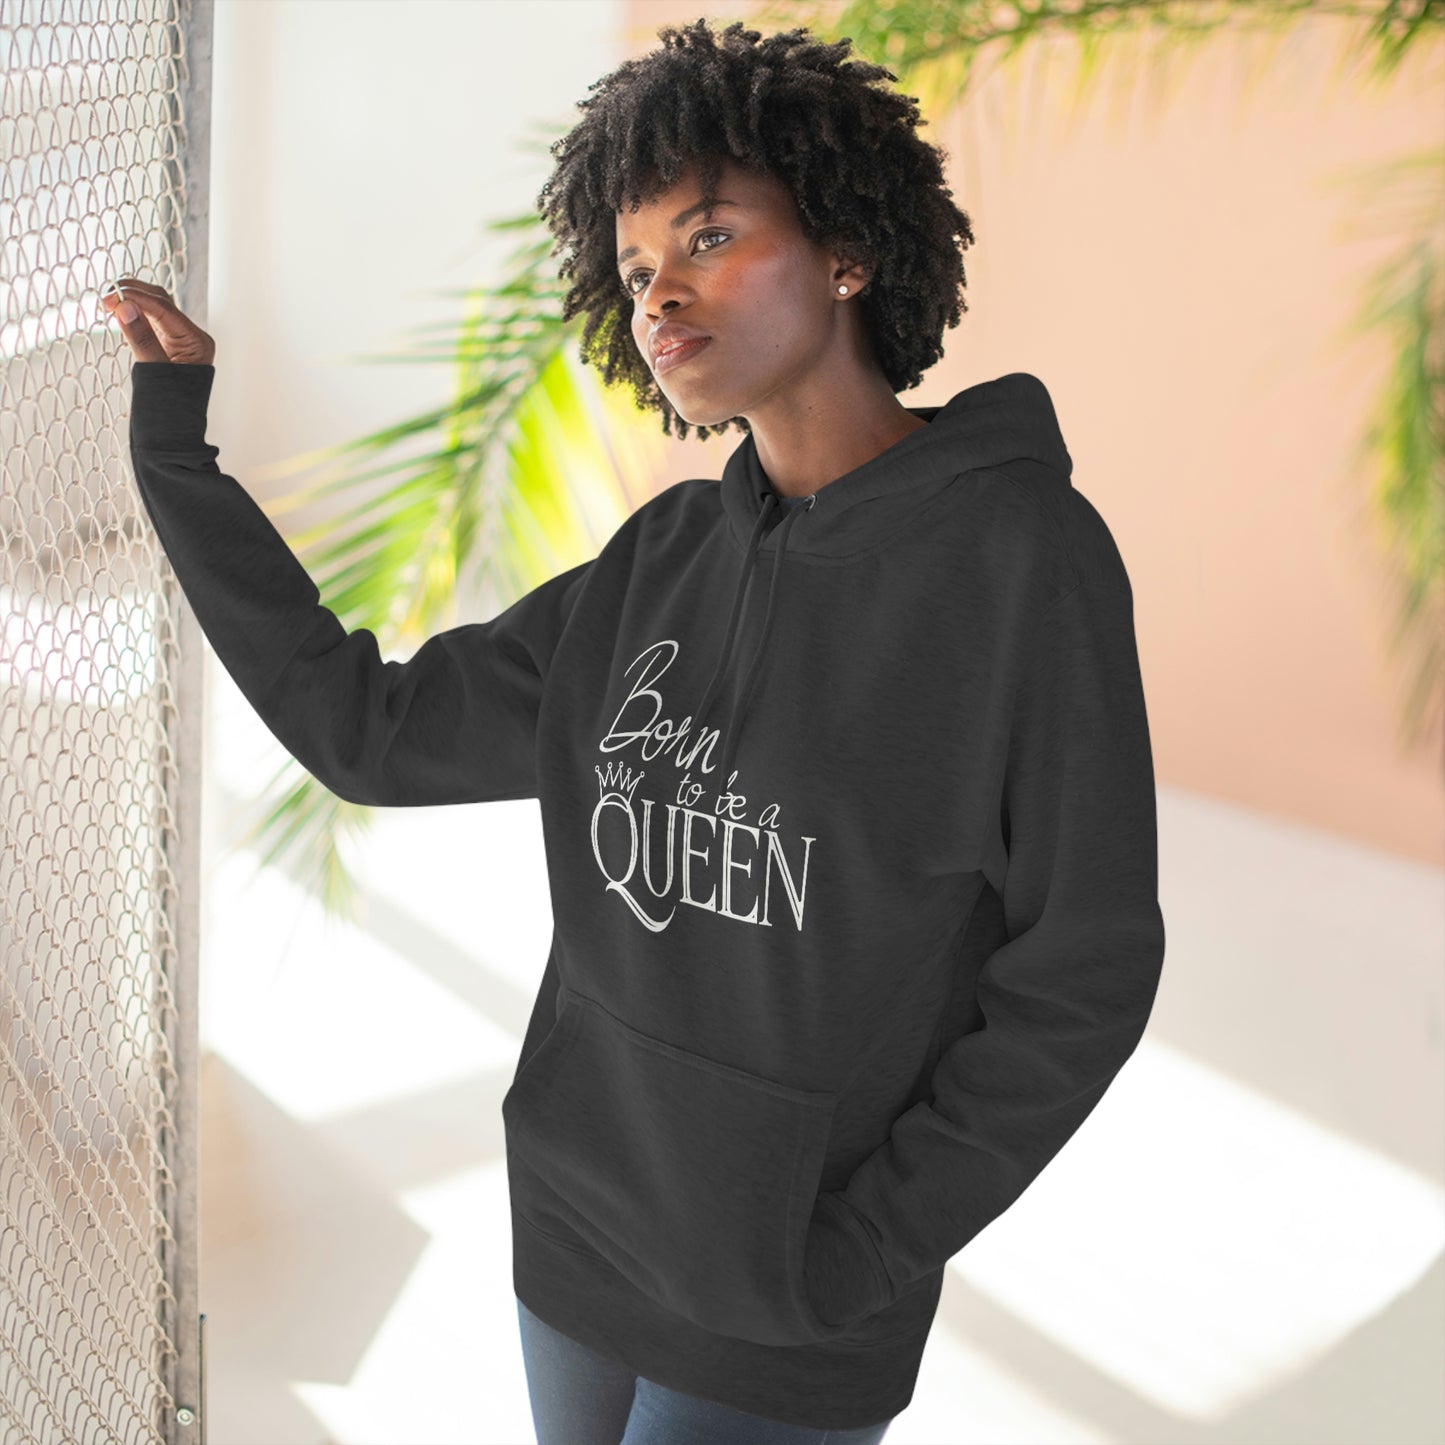 Born to be a Queen -  Premium Pullover Hoodie